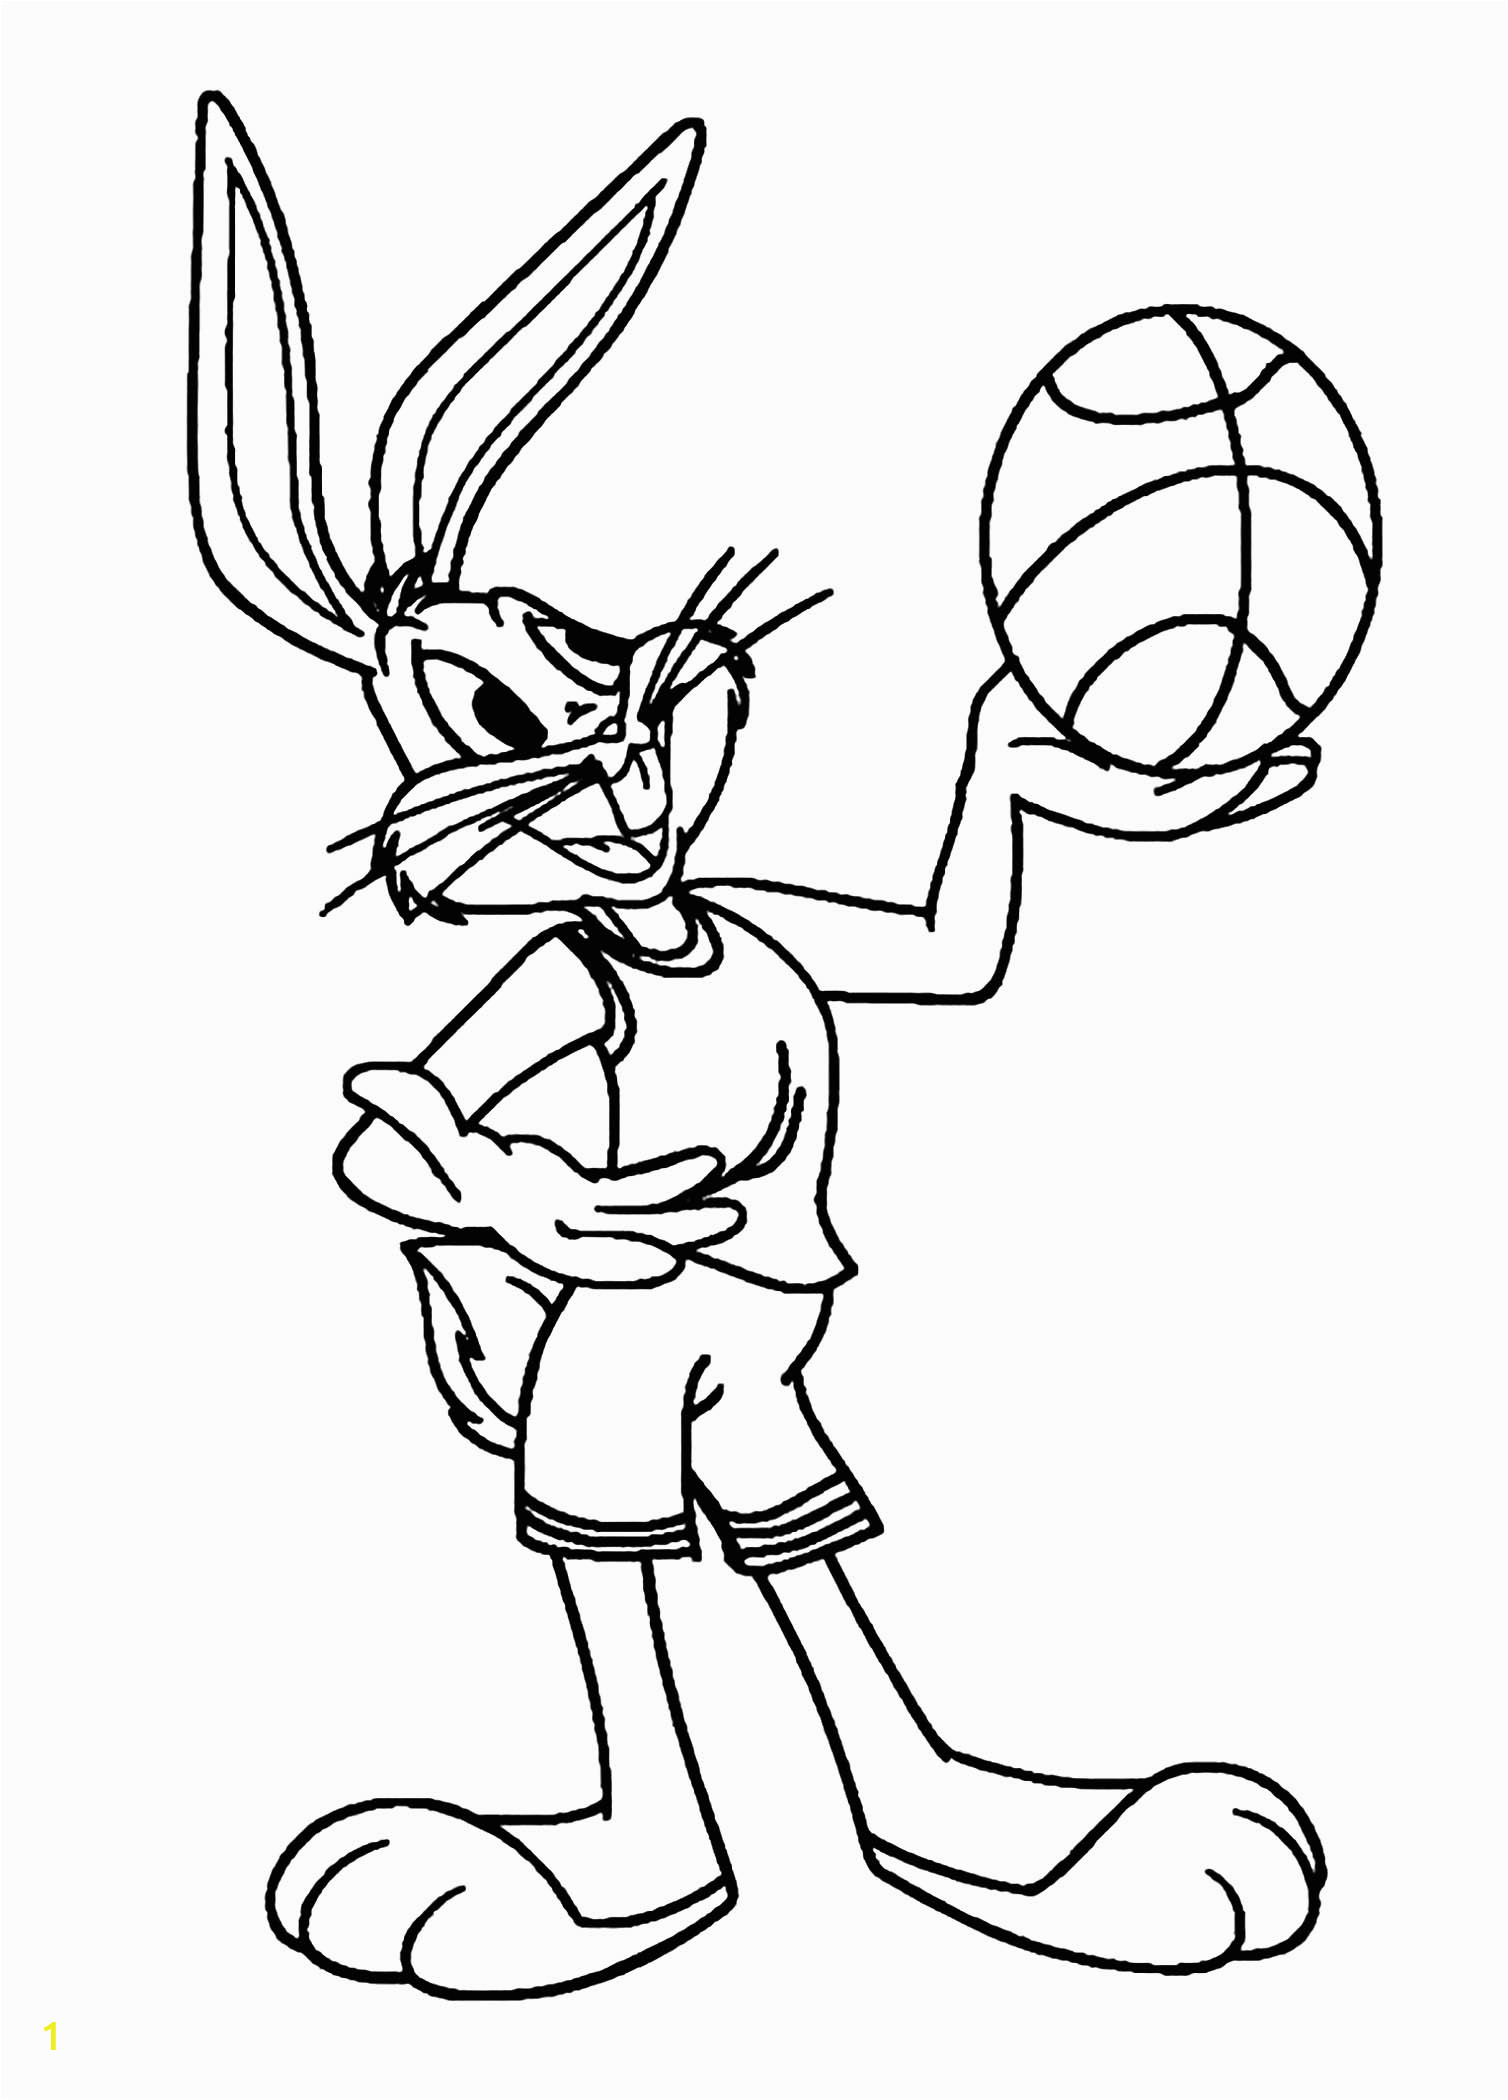 Basketball Coloring Pages for Kids Printable Basketball for Kids Basketball Kids Coloring Pages